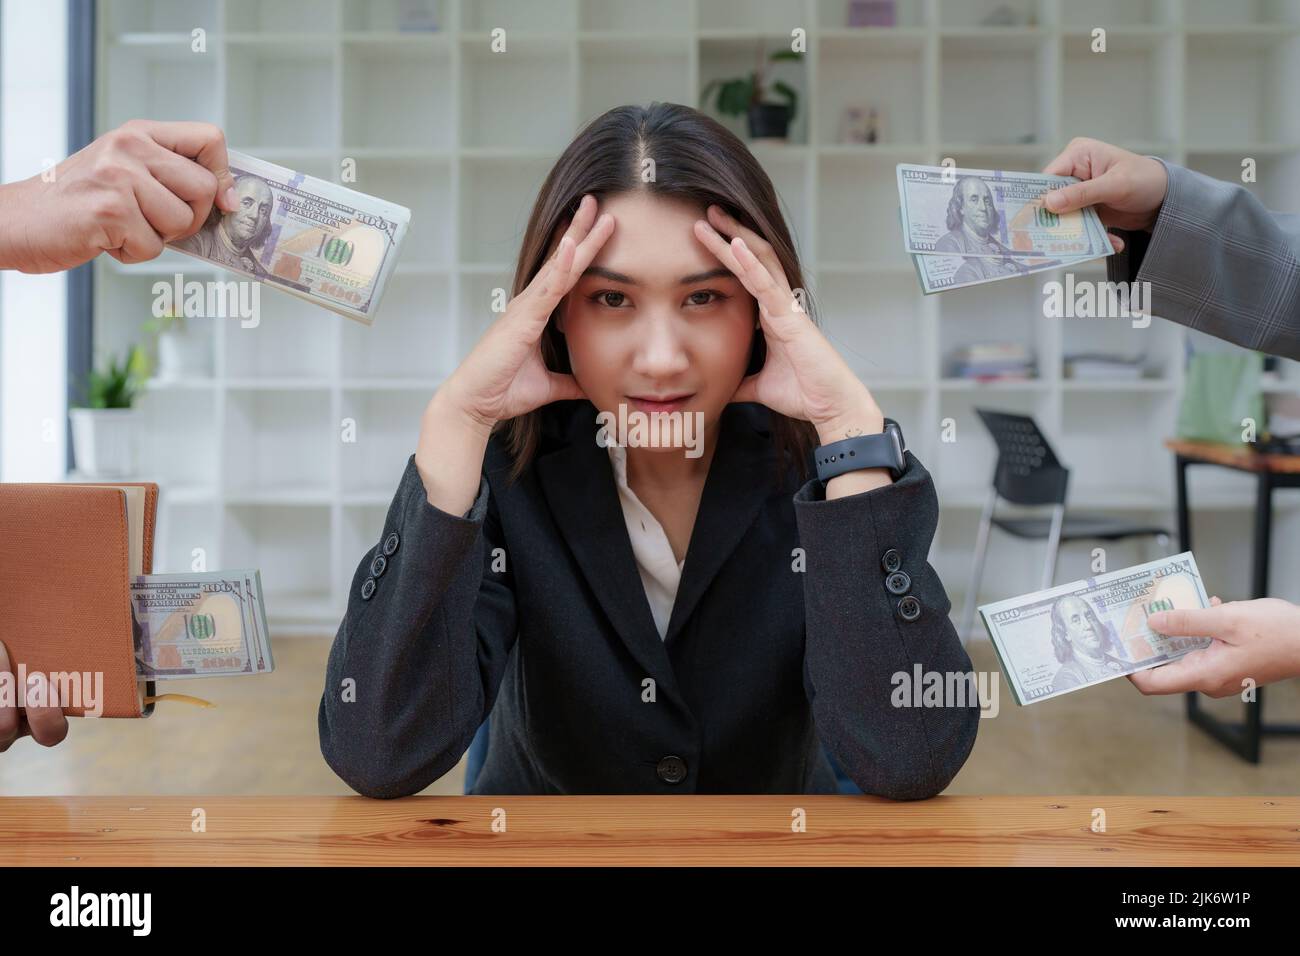 Anti Bribery and corruption concept. Business woman refusing dirty money to agreement contract. Stock Photo